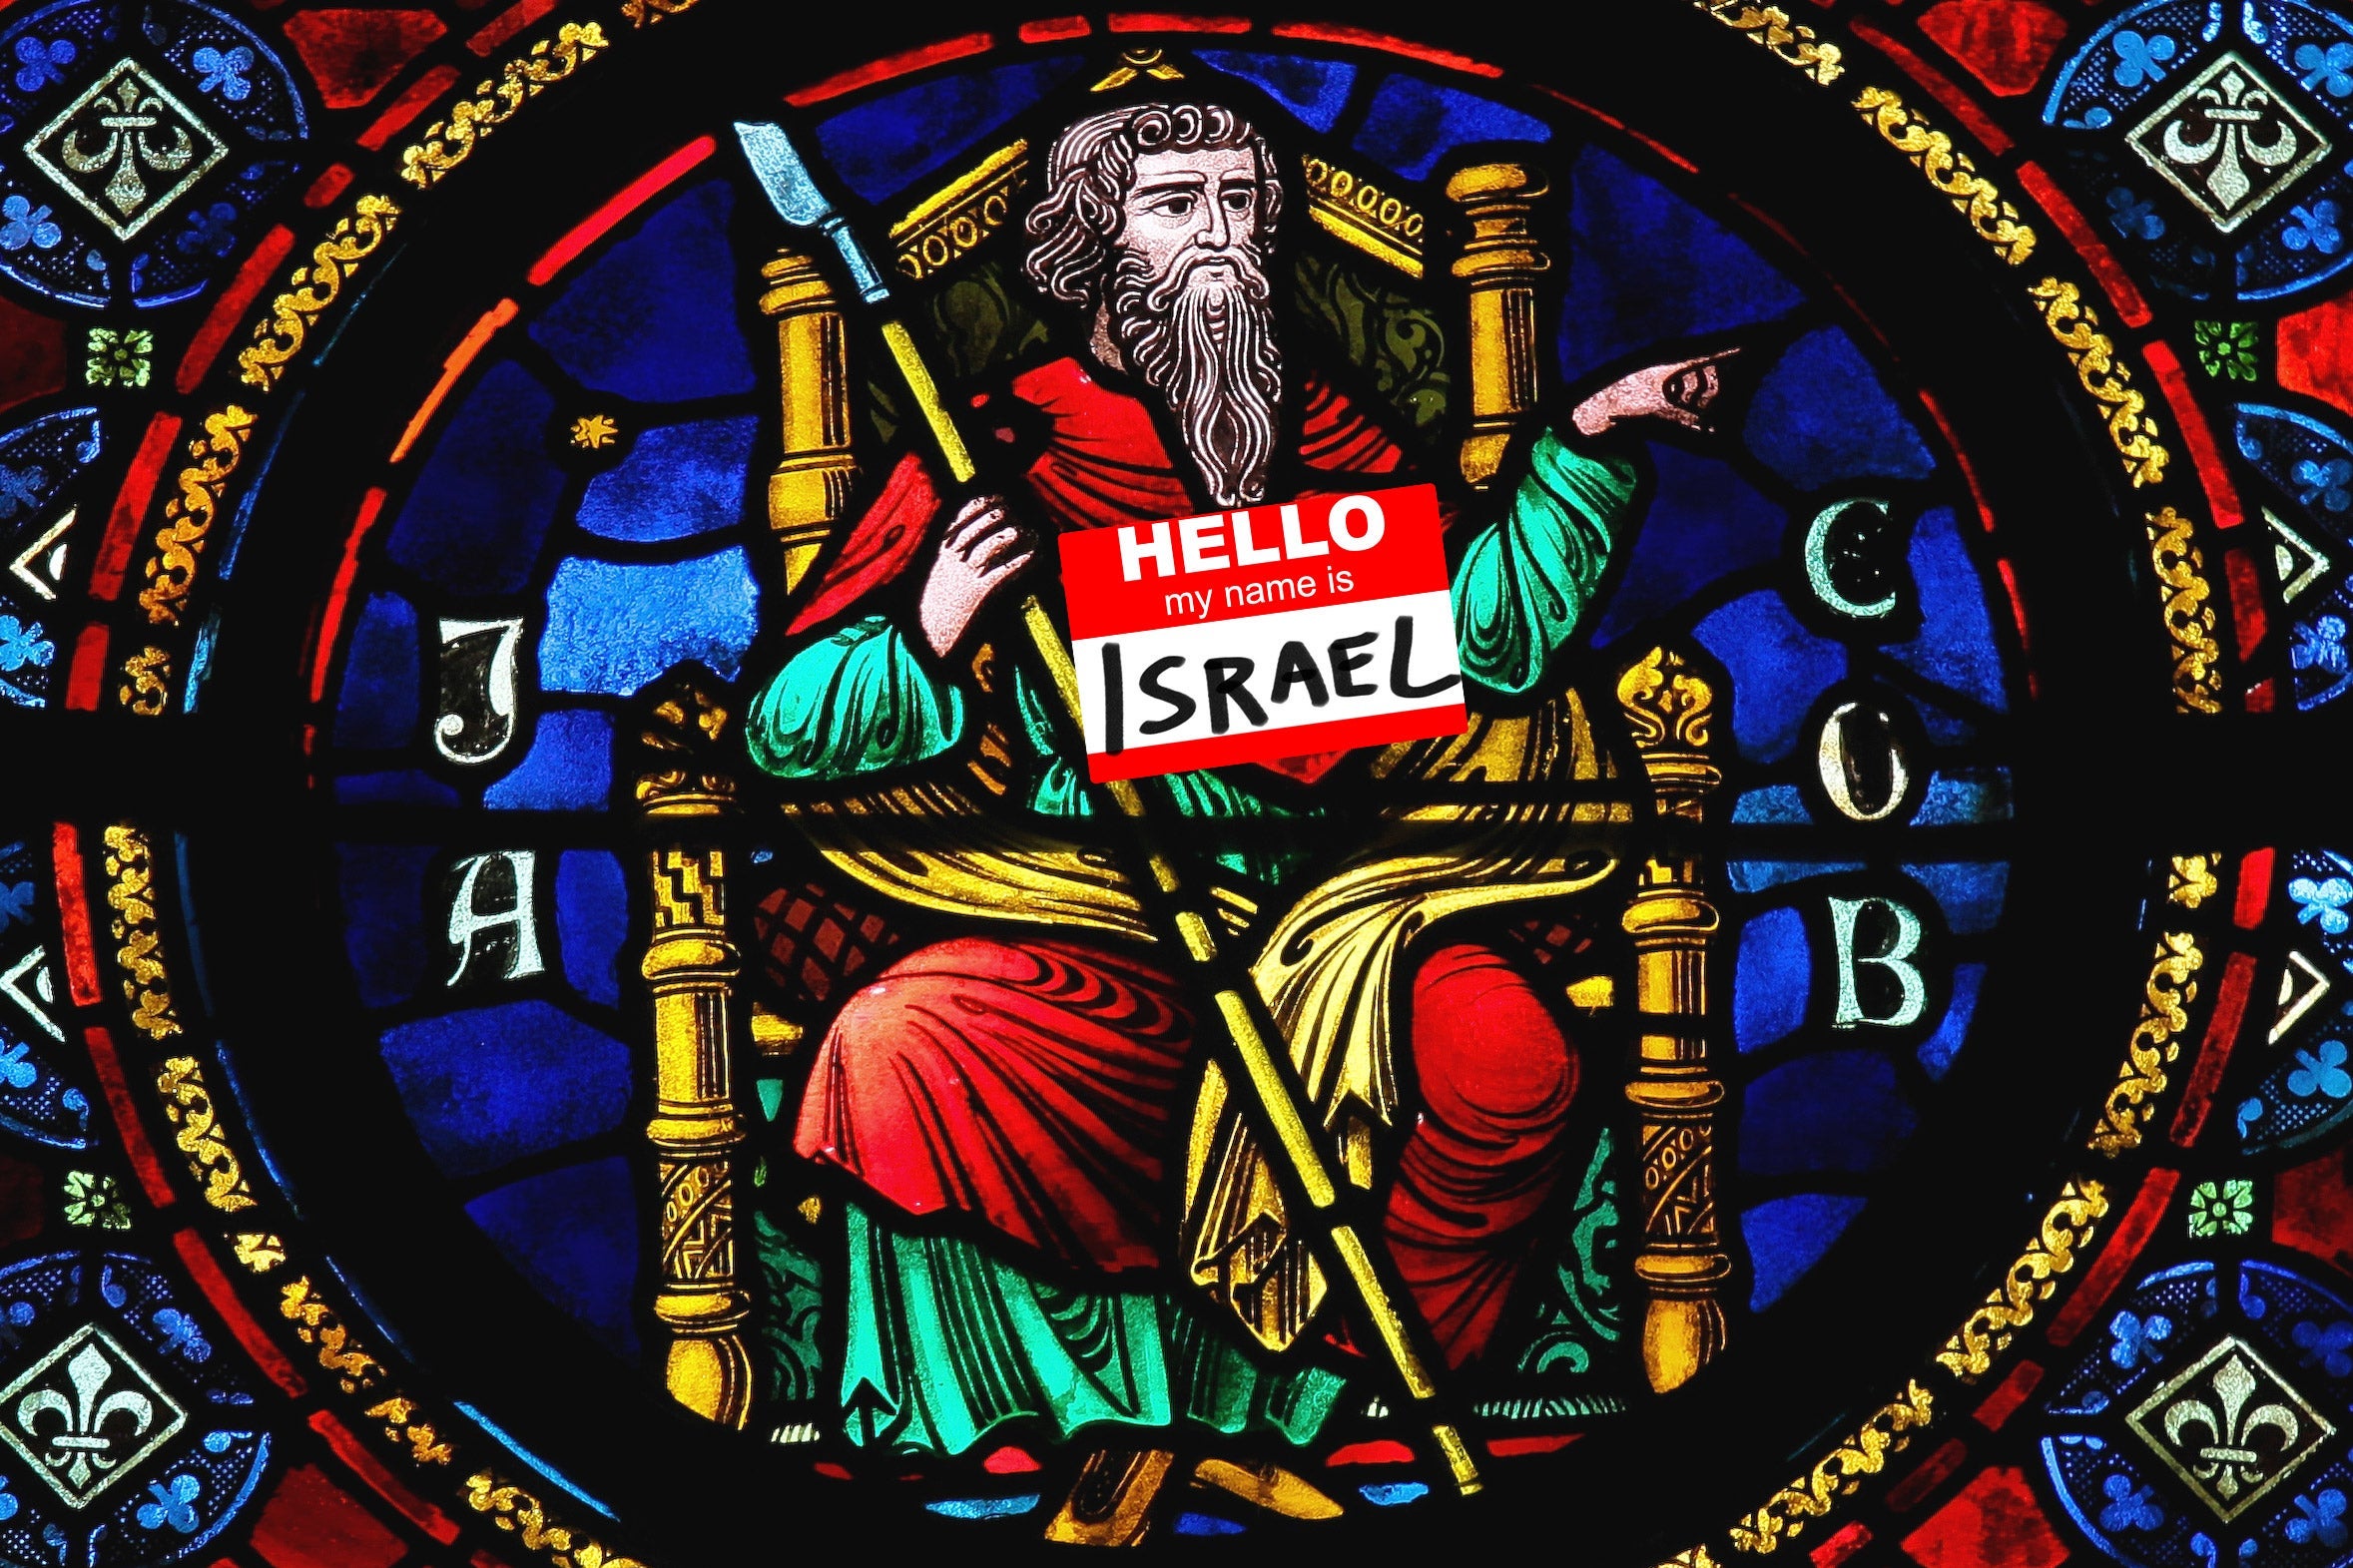 A stained glass rendering of Jacob on a throne with a scepter, and a nametag that says "Hello, My Name Is ISRAEL."